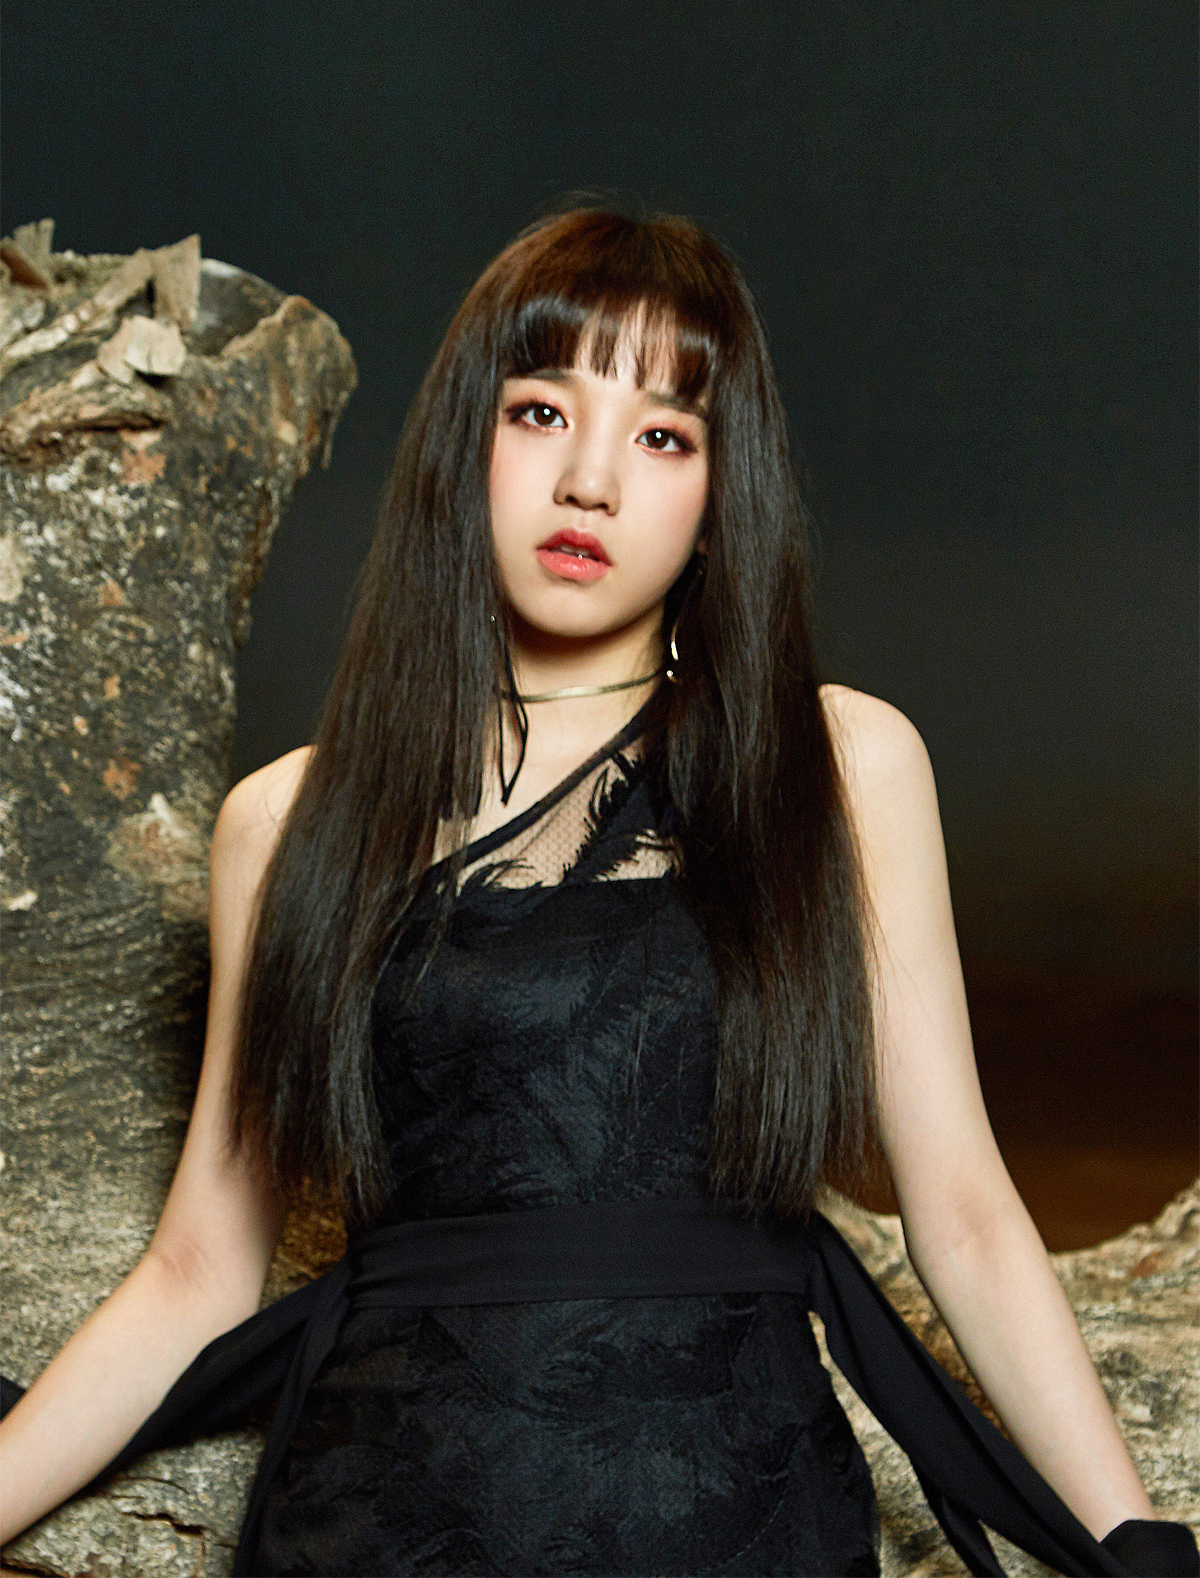 Girl group (girl) children member Song Yuqi joins China version Running Man Run ()On the 11th, China Storage Satellite TV Run released members who joined the new season through official Wei Bo.In Run season 7, Song Yuqi, Licheon, Angela Baby, Zeng Kai, Juamun, Wang Yim and Lucas are active as fixed members.Song Yuqi made his debut with group (girl) children in May last year, winning six new rookie awards in succession with Lattata and Han in succession, proving to be the best rookie of 2018.On the other hand, the (girl) children of Song Yuqi will release their second mini album I MADE on the 26th and continue their trend.Photos  Cube Entertainment